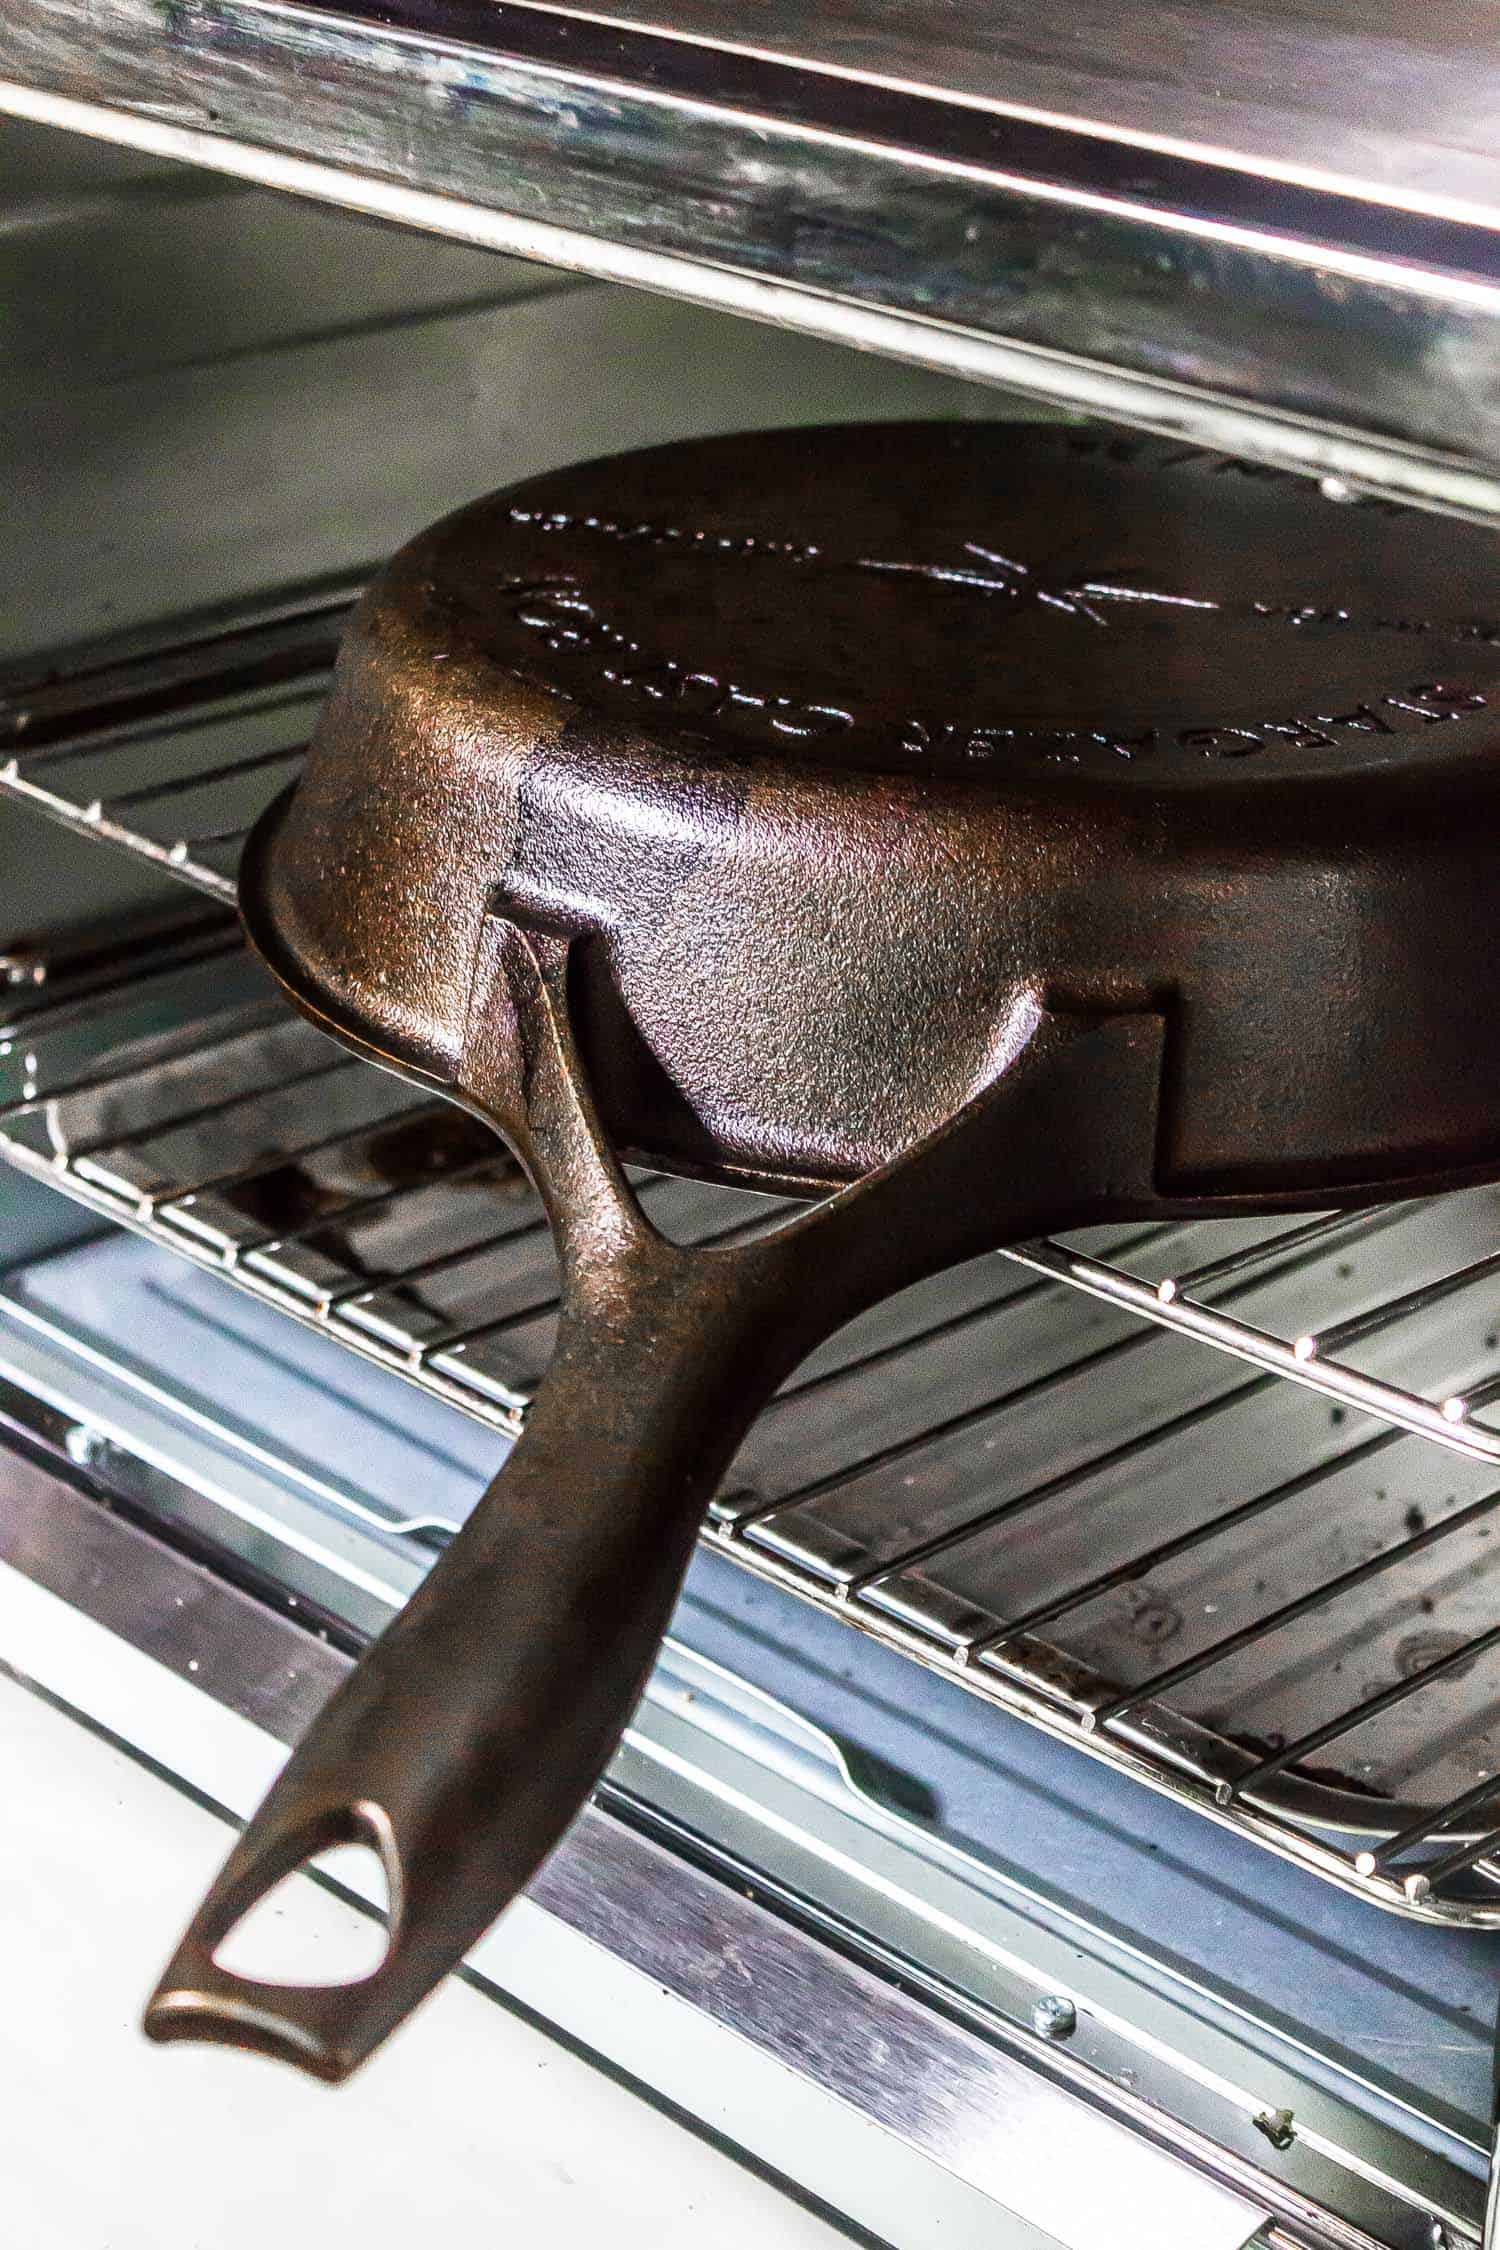 baking a cast iron skillet in the oven to season it